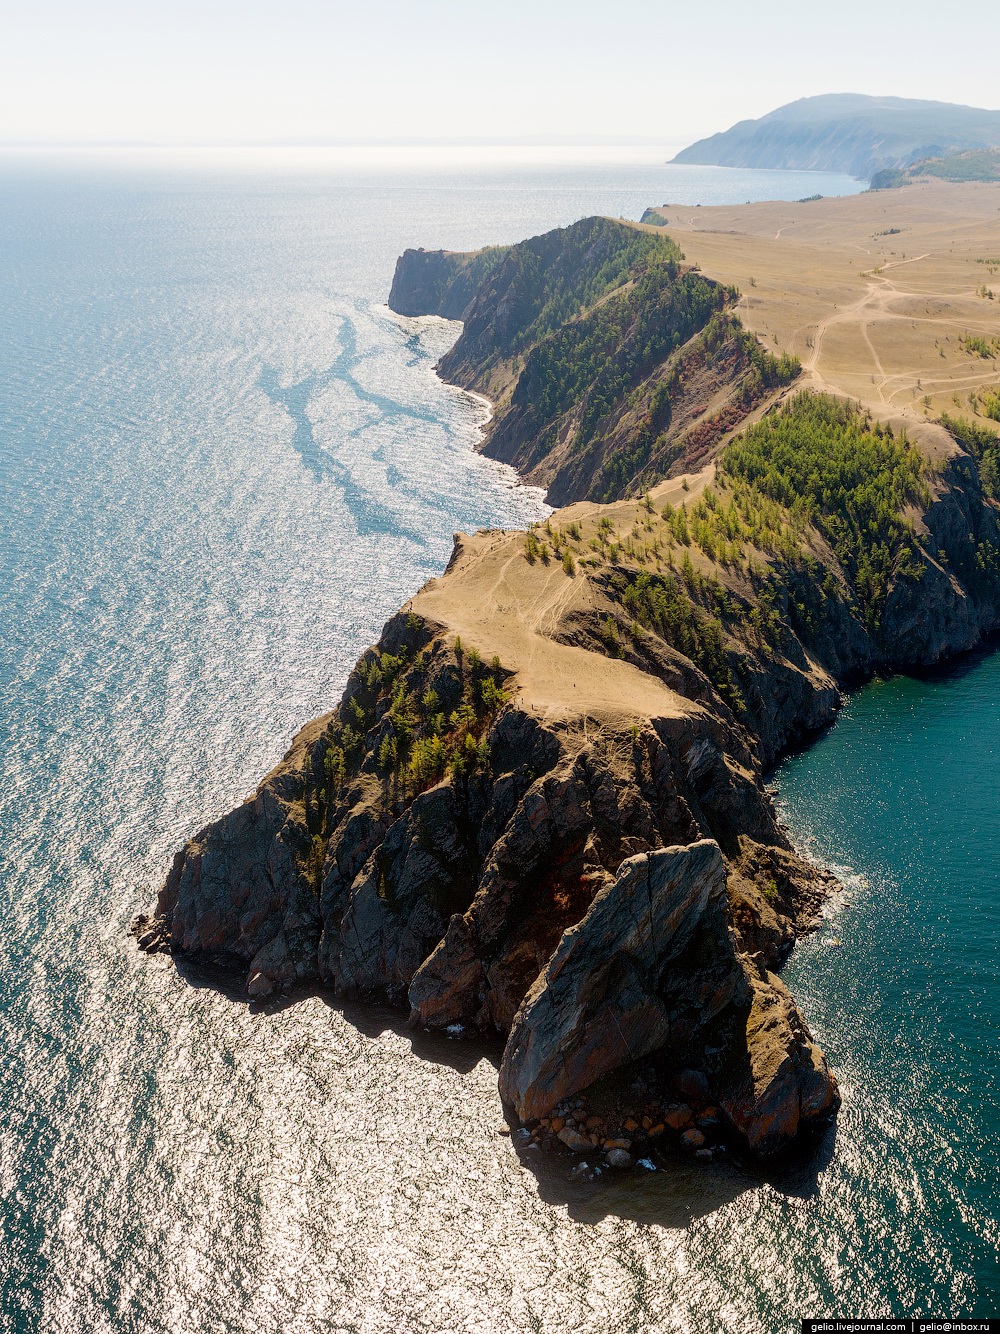 Let’s fly a helicopter over Lake Baikal · Russia Travel Blog